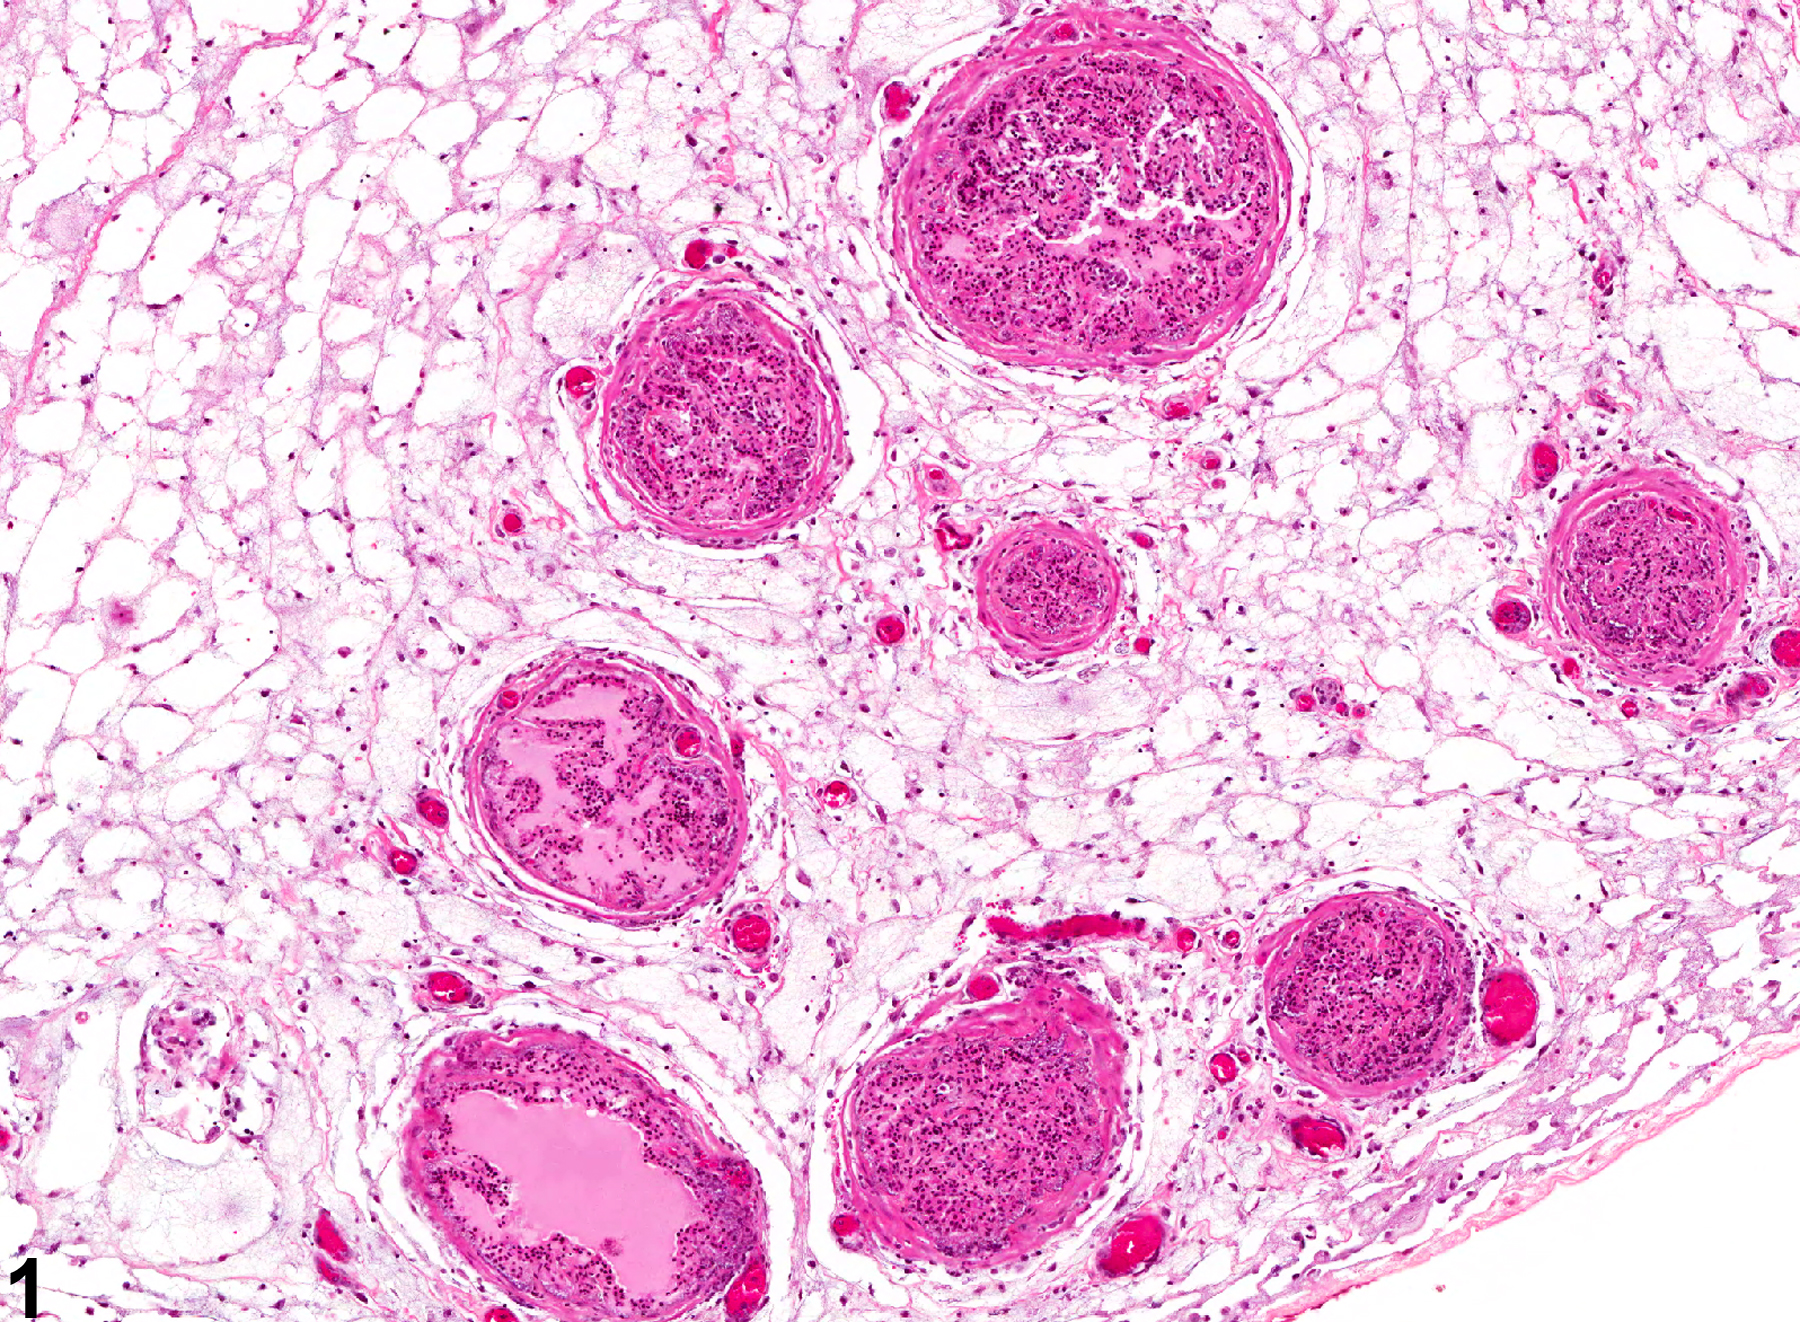 Image of edema in the prostate from a male F344/N rat in a chronic study